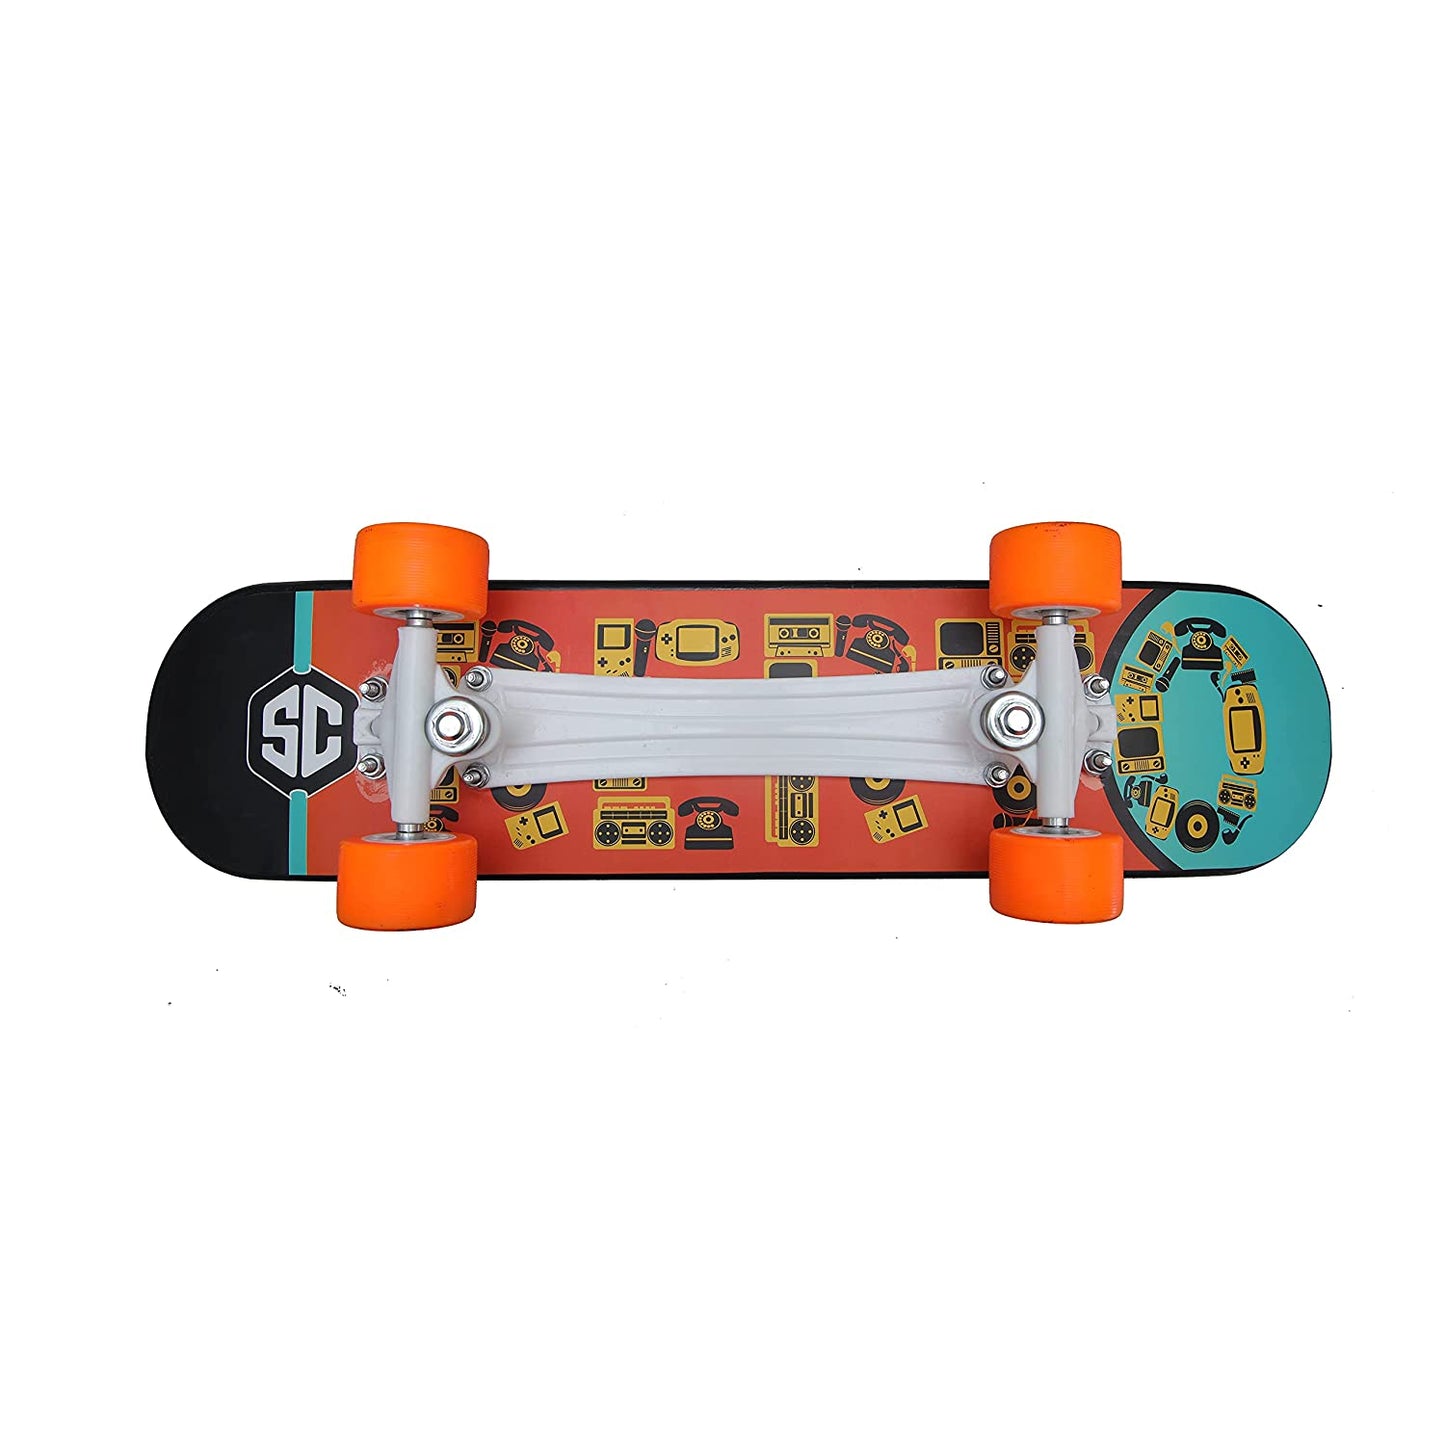 Skateboard, Skateboard For Kids, Specially Designed With A Pro Pattern & Length Of 27" X 6.5" Width (Retro Radio)